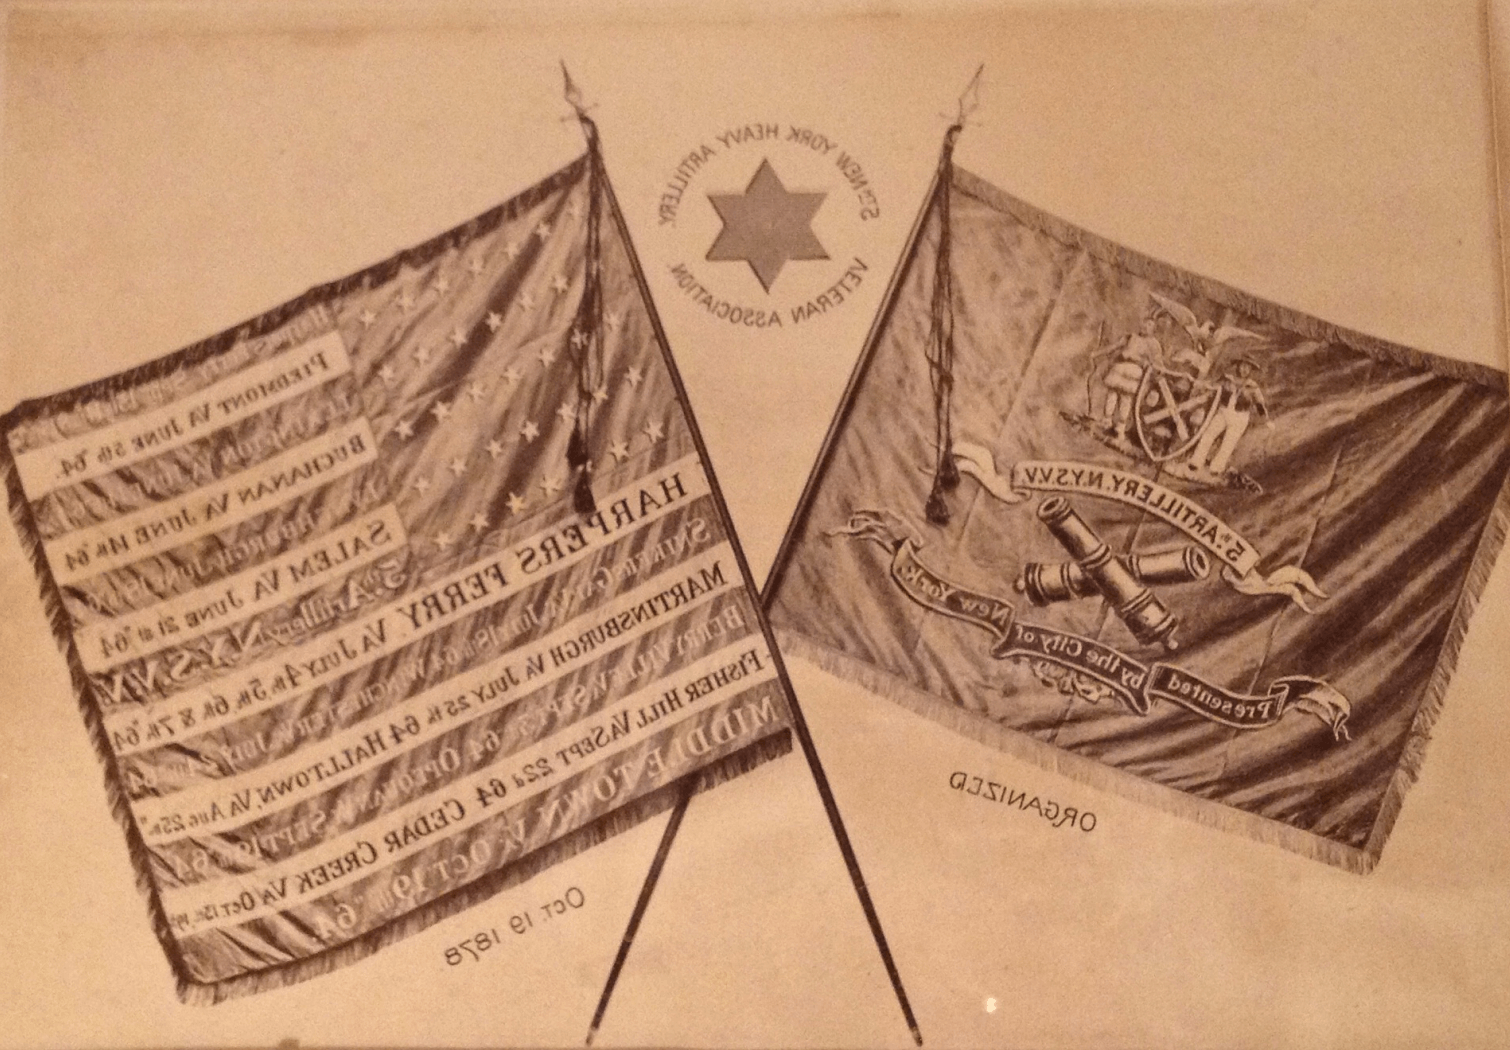 5th NYHA Flags (From J. Noyalas, private collection)